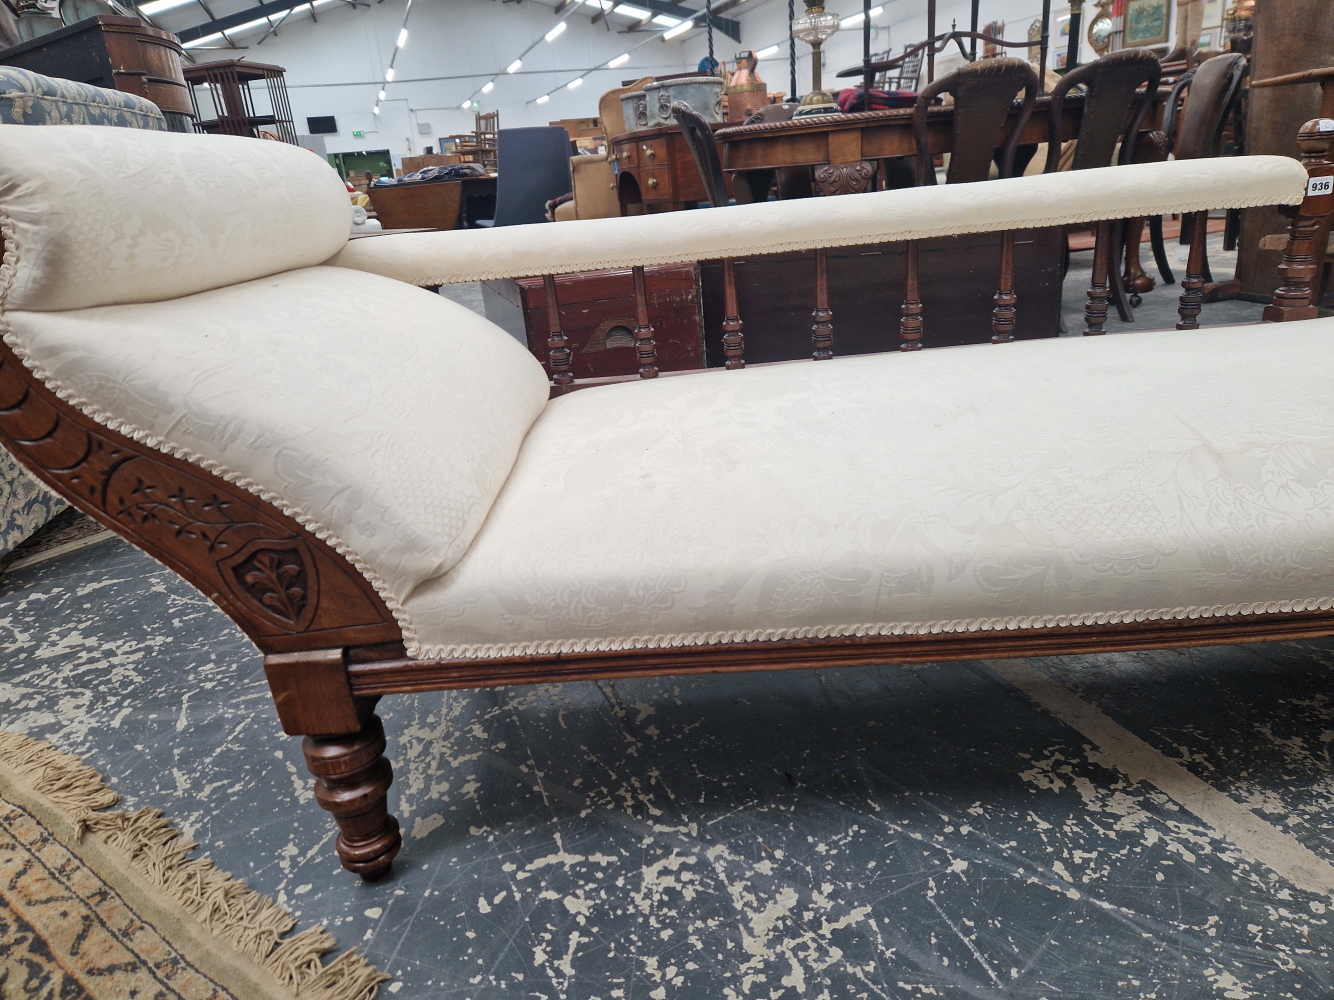 AN EARLY 20th C. MAHOGANY CHAISE LONGUE UPHOLSTERED IN WHITE DAMASK, ONE LONG SIDE WITH A BALUSTRADE - Image 3 of 6